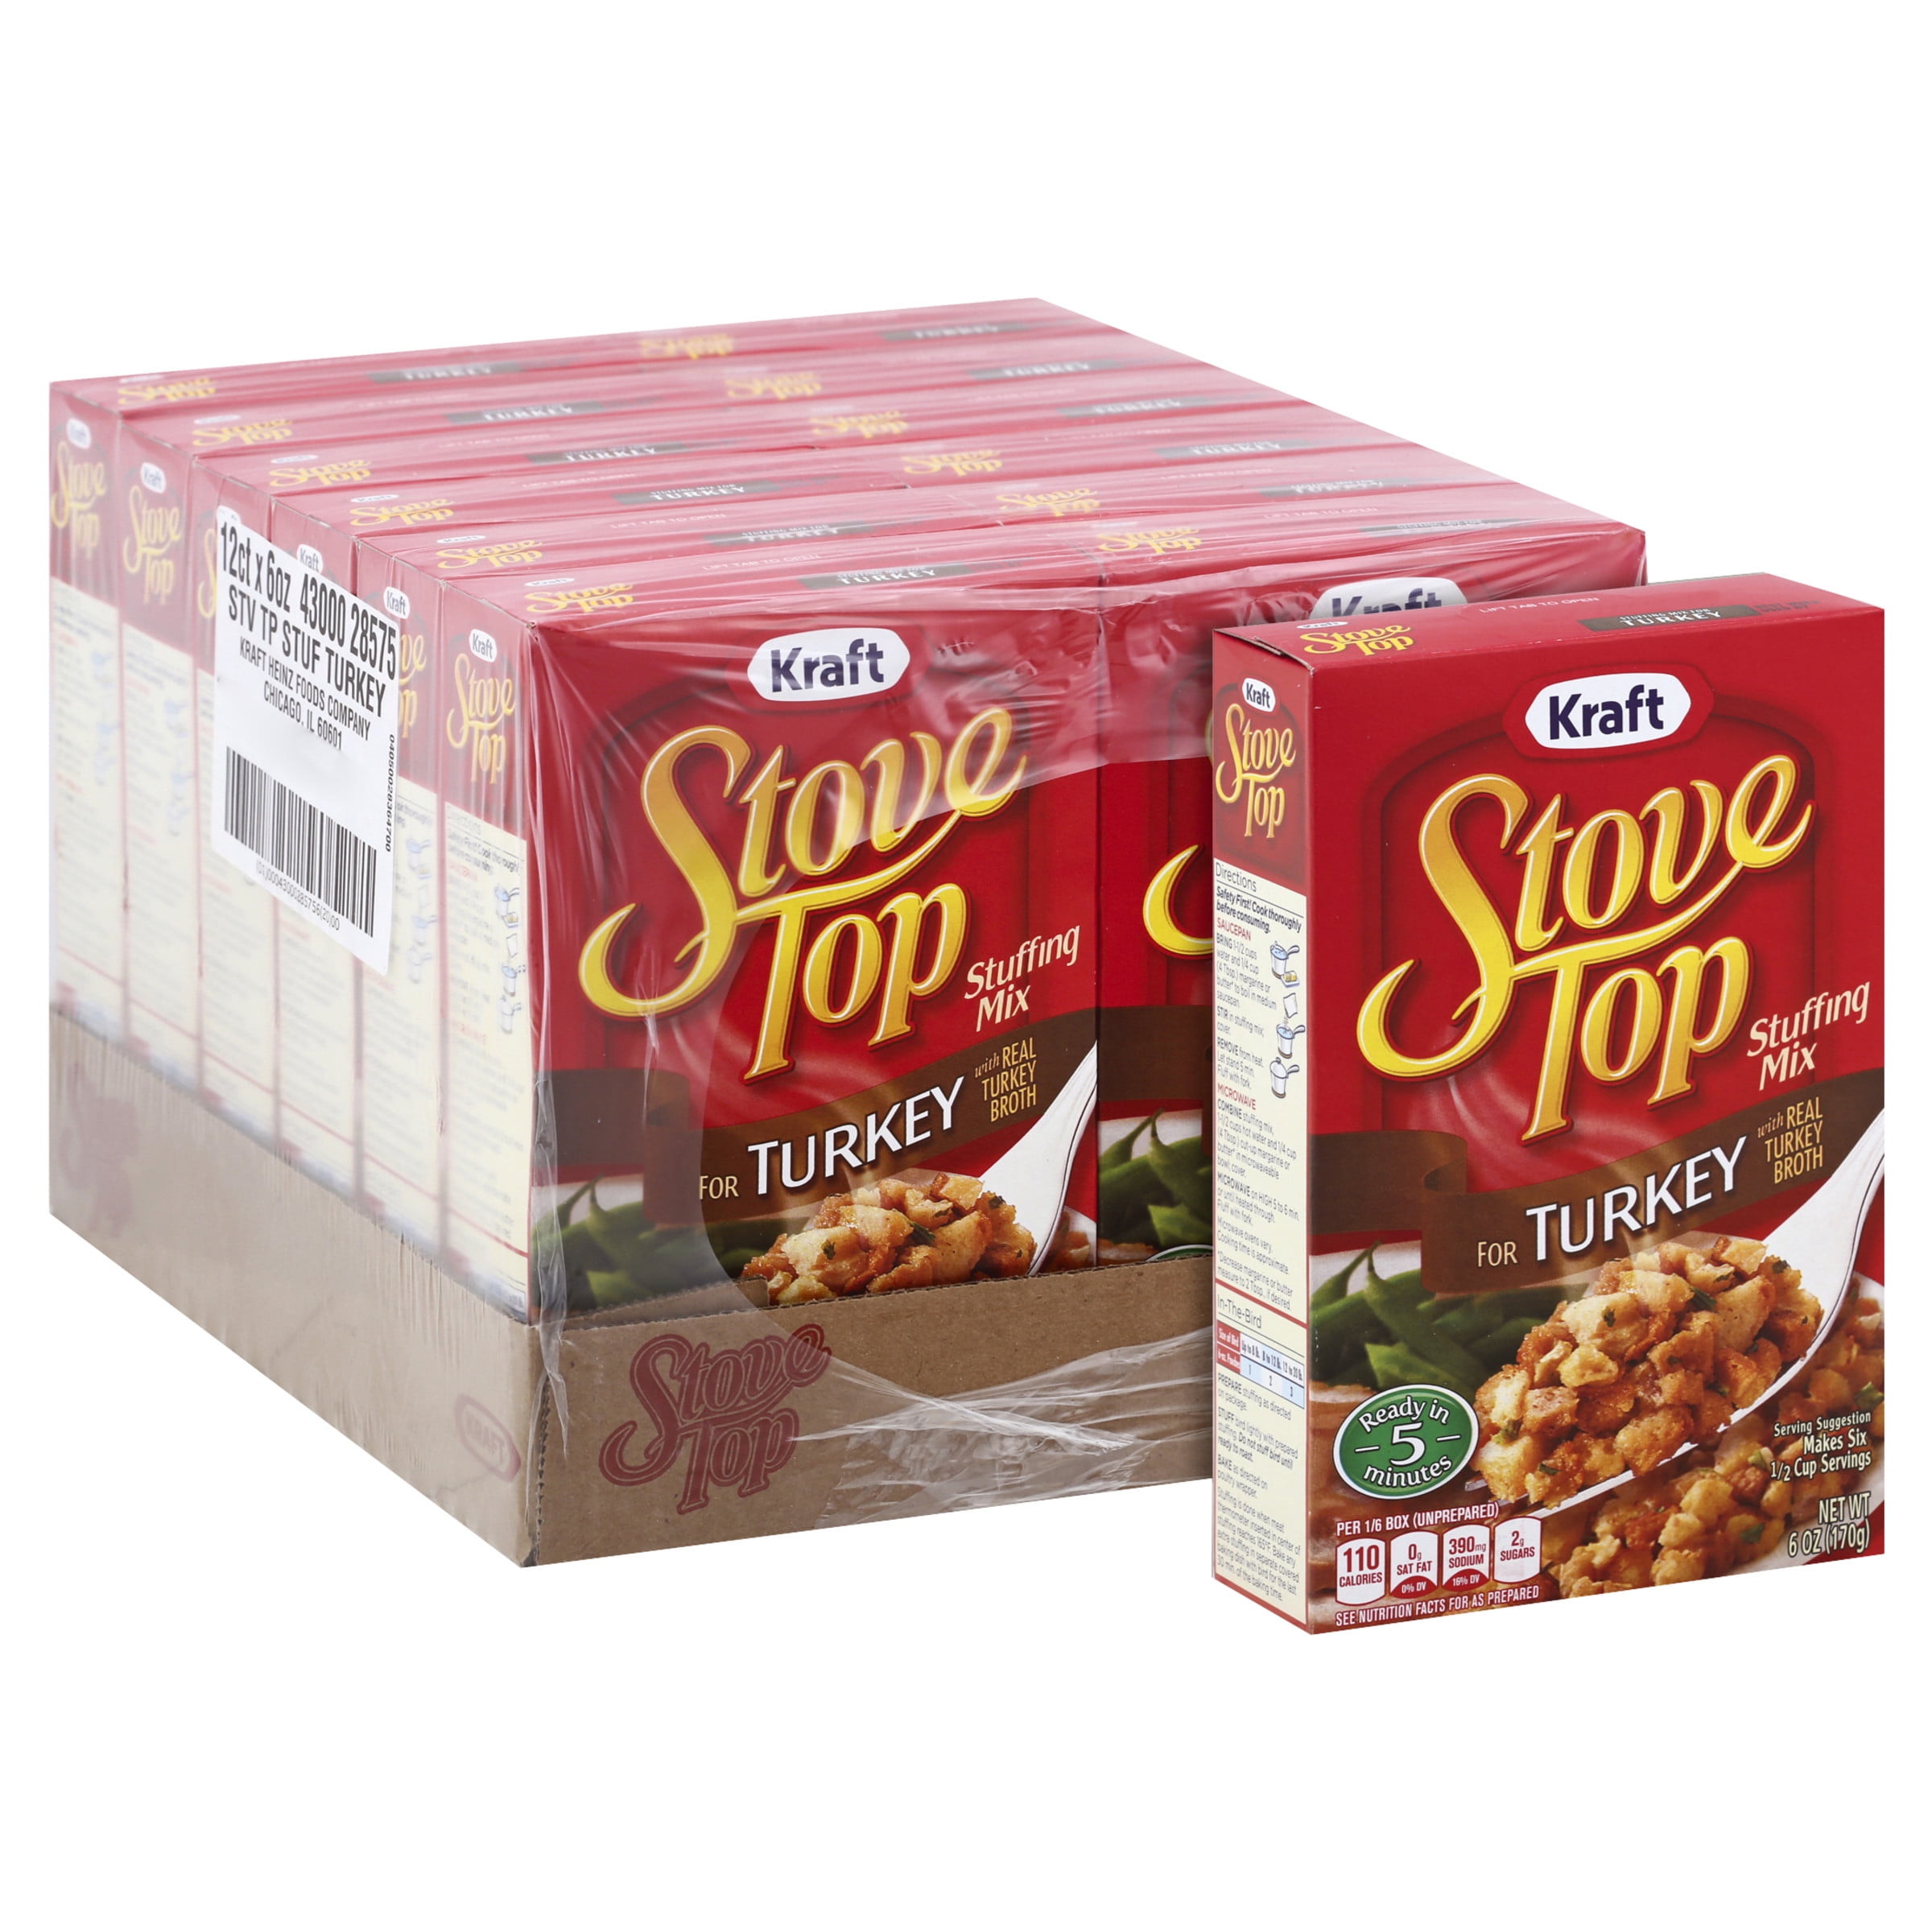 Stove Top Everyday Stuffing Mix, for Turkey, Shop